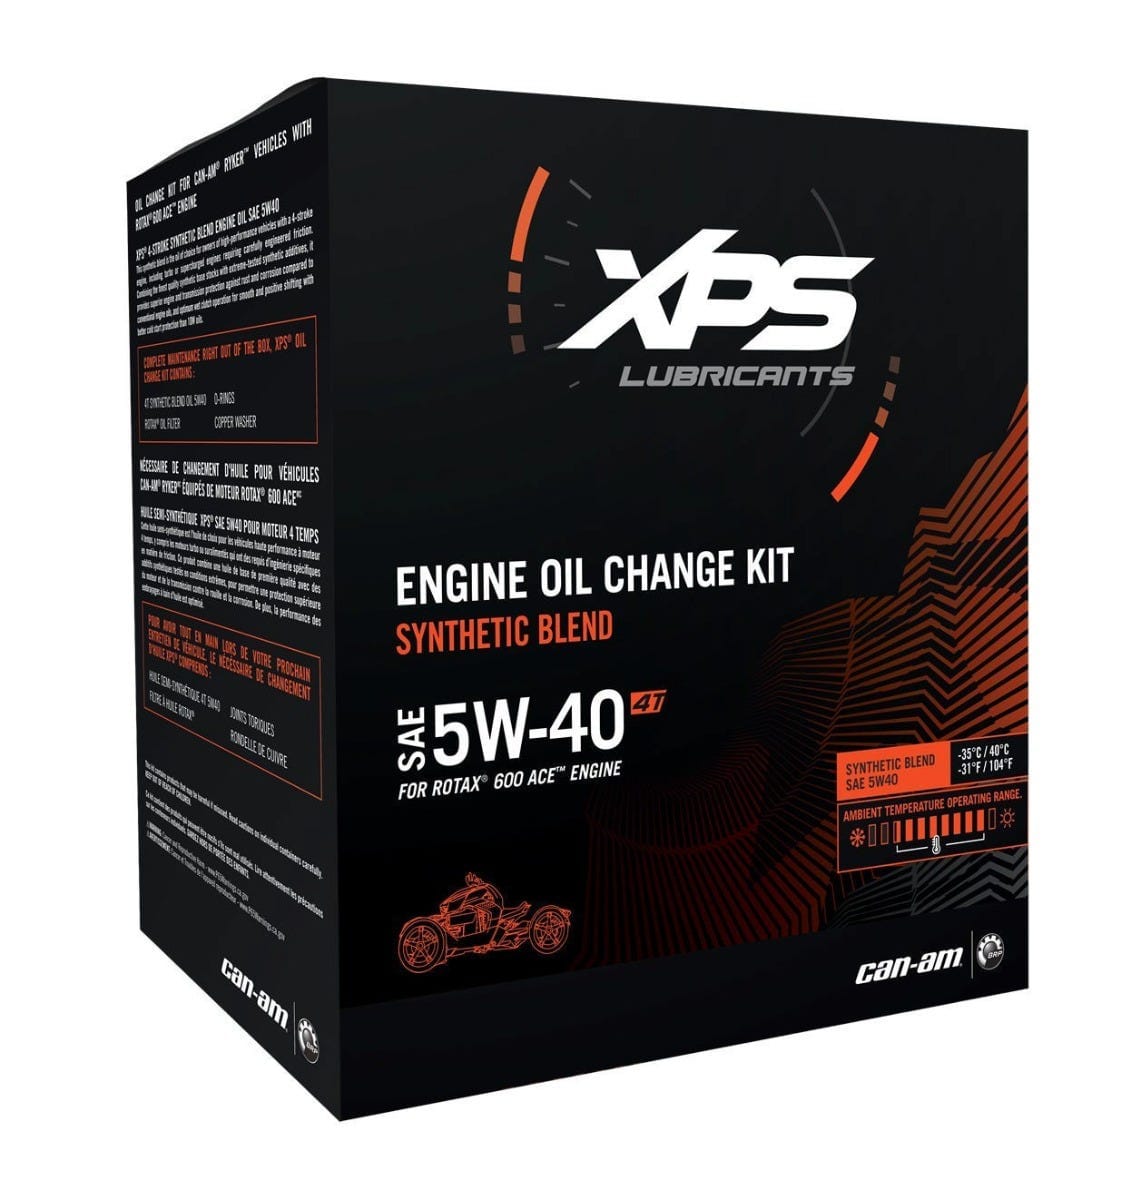 4T 5W-40 Synthetic Blend Oil Change Kit for Rotax 600 CC engine